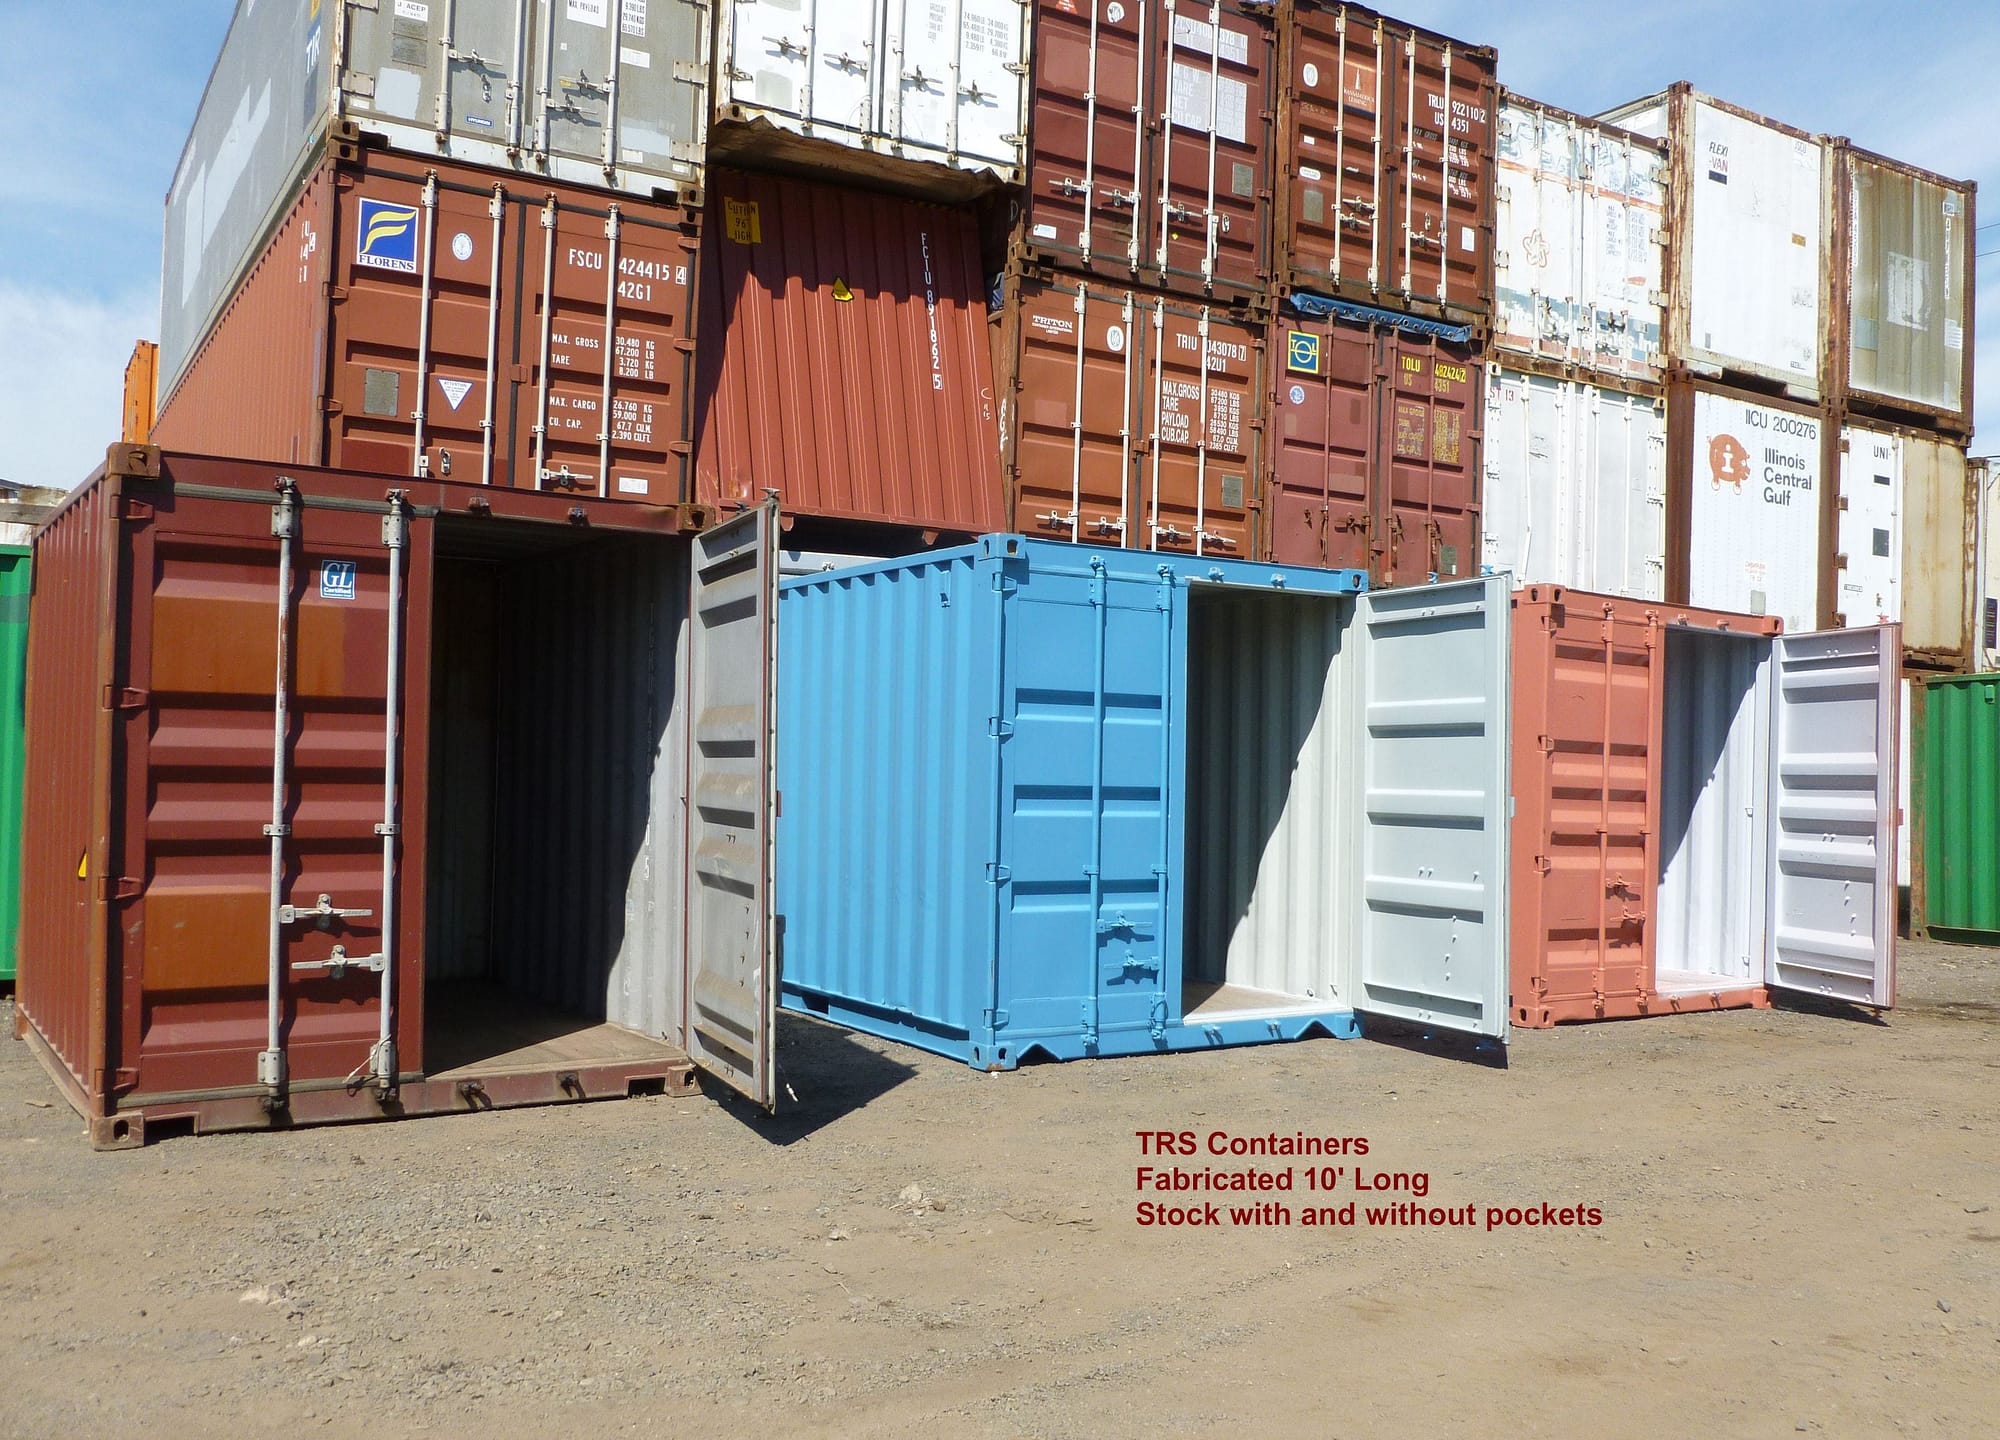 TRS Containers builds used 10ft long steel storage containers that right way.